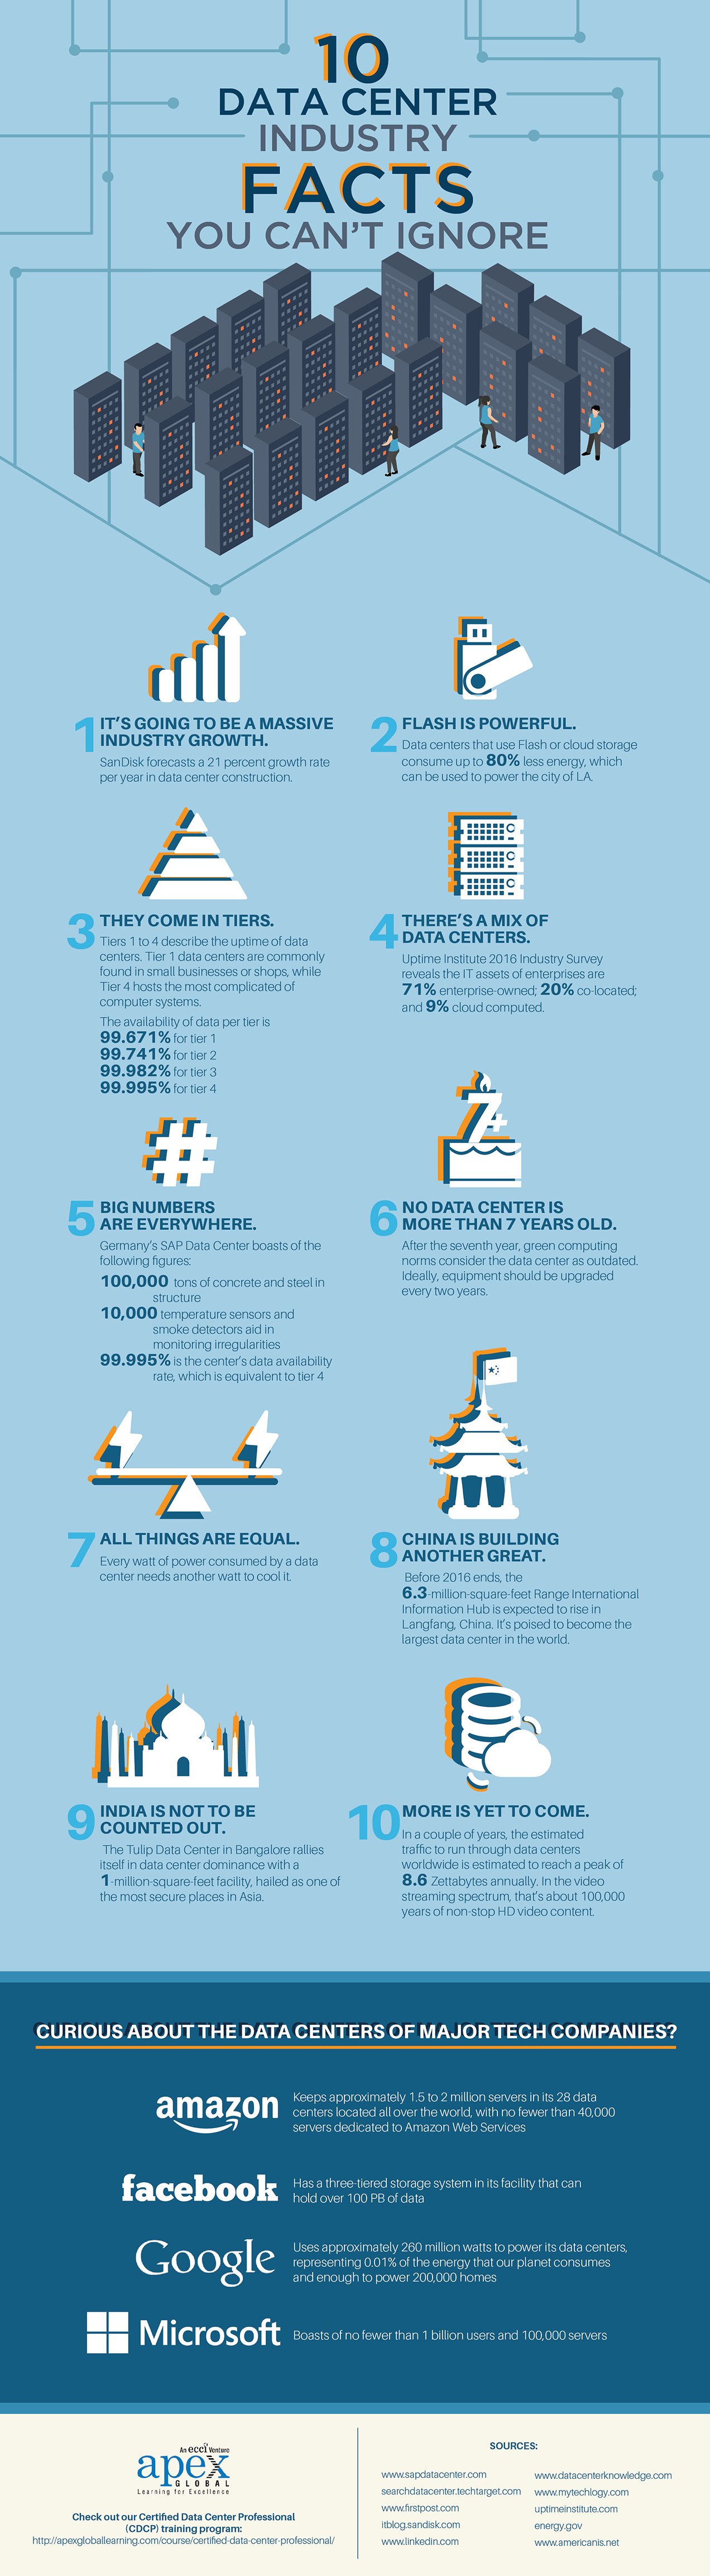 Data Center Industry Facts You Can’t Ignore Infographic_rev1 (1)